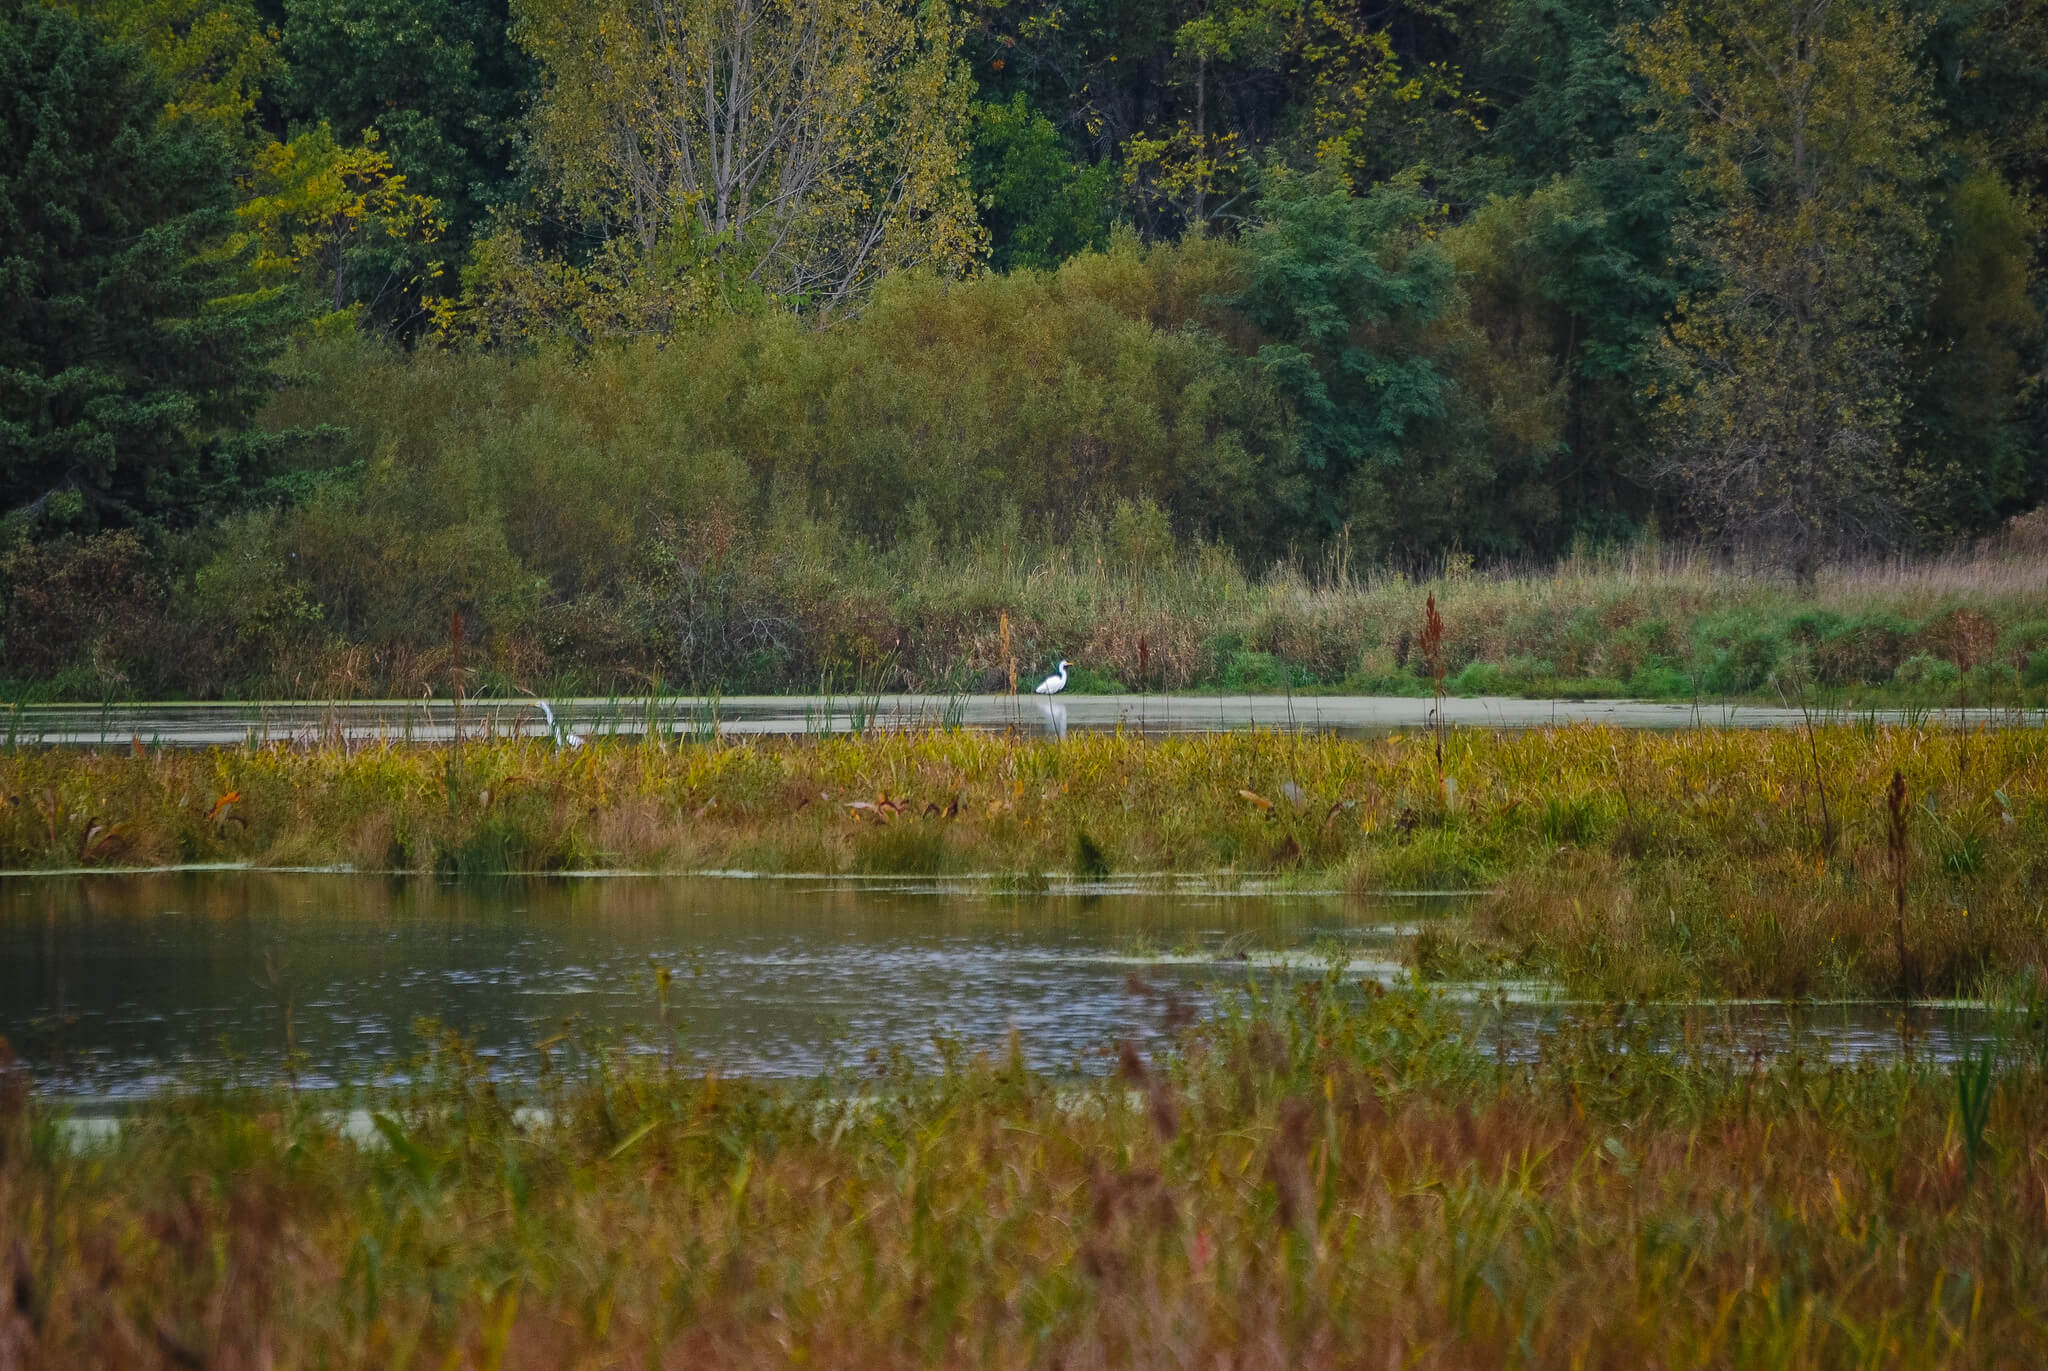 Wetland in fall with two white birds in the shallow water.